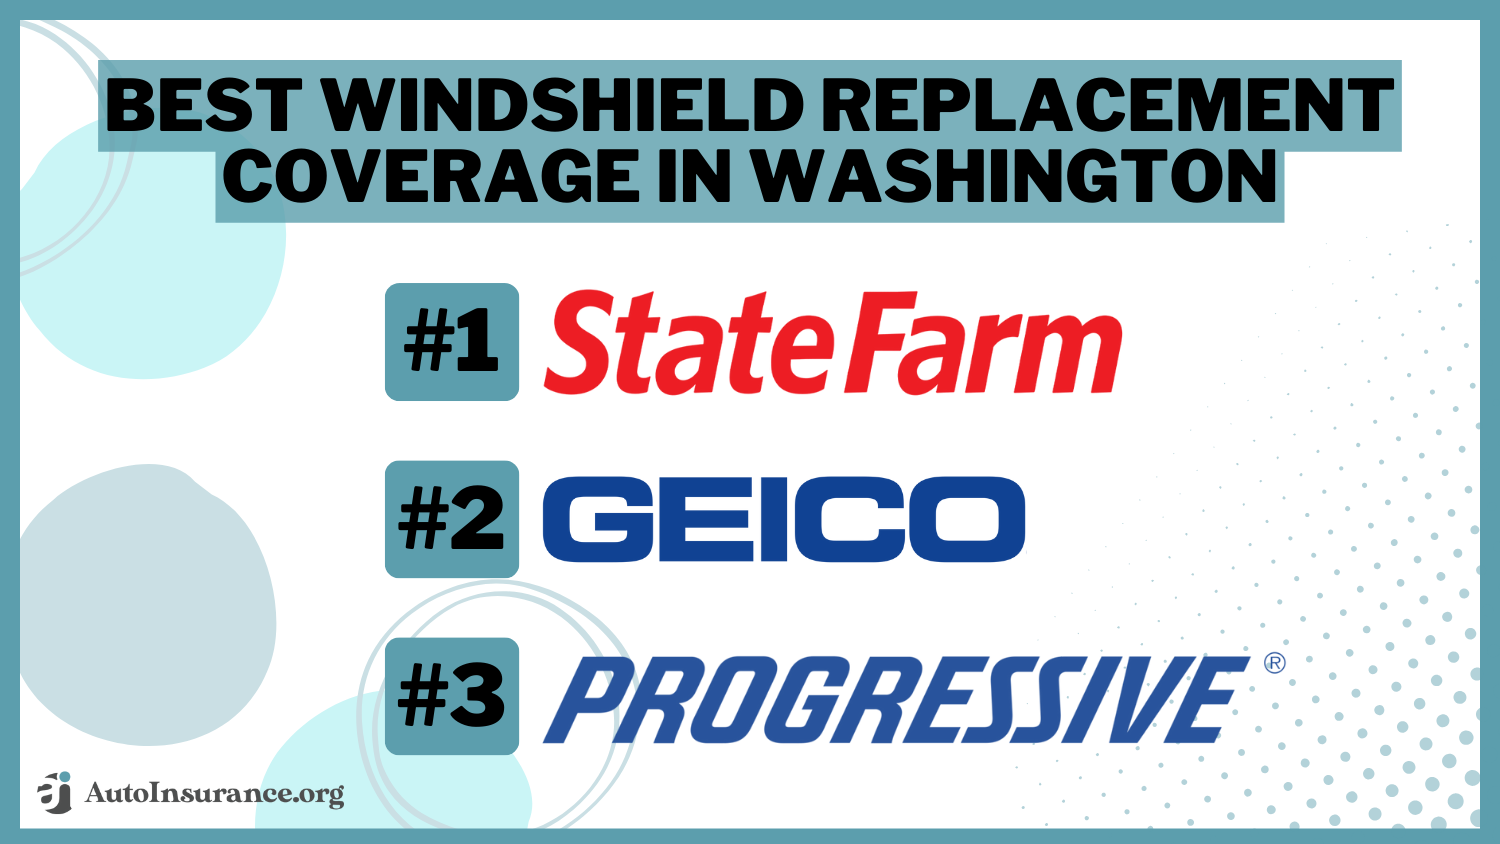 Best Windshield Replacement Coverage in Washington: State Farm, Geico and Progressive